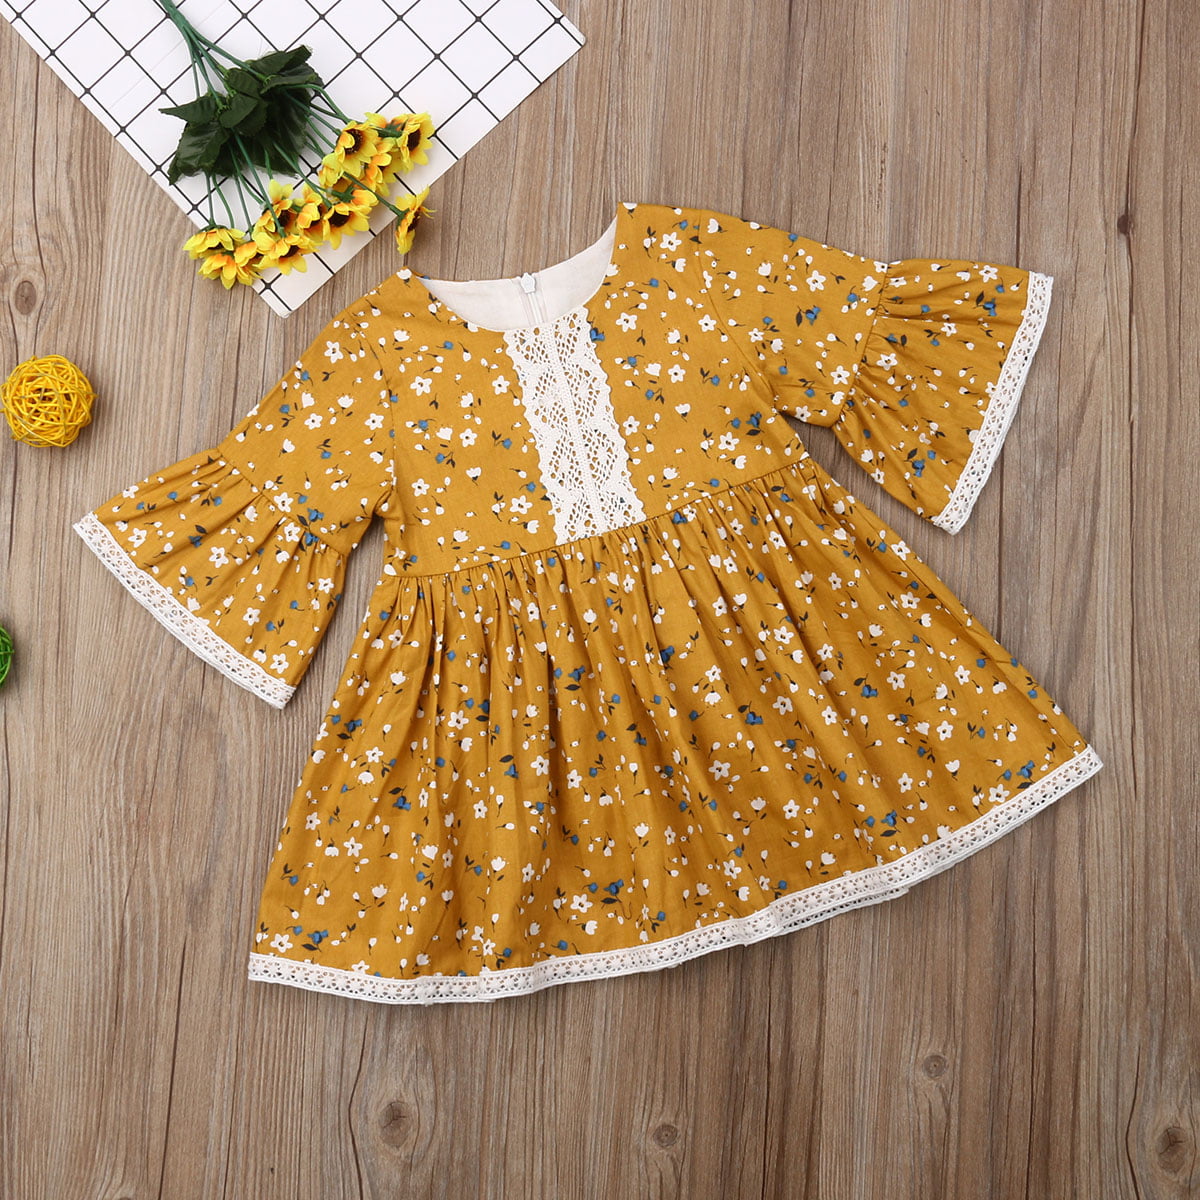 Toddler Kids Baby Girls Dress Floral Print Flare Sleeve Princess Dresses Outfits 